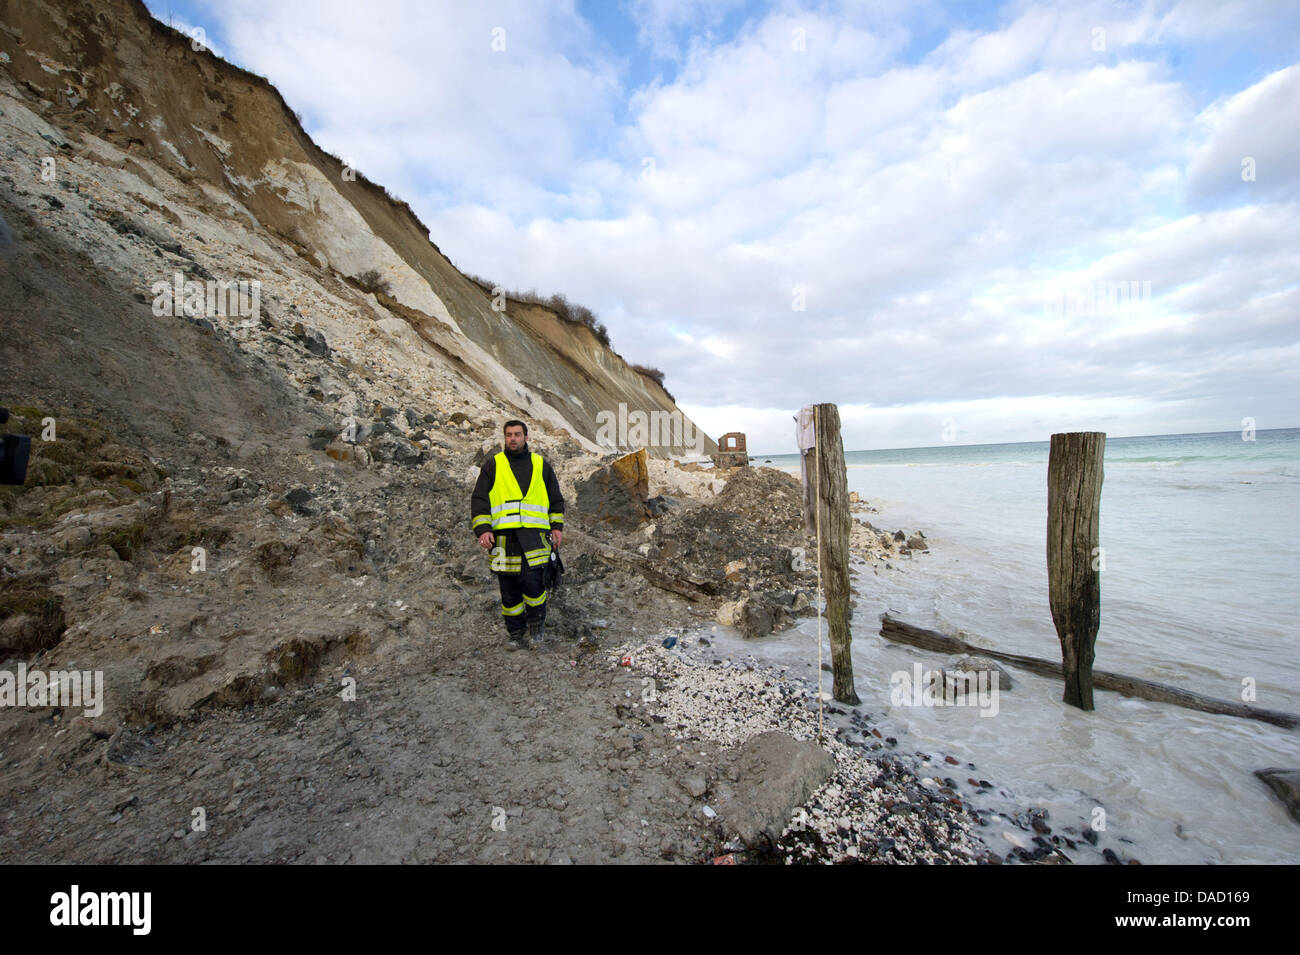 Chief of operations Daniel Hartlieb examines a scene of an accident at the steep coast Kap Arkona at the Baltic Sea in Putgarten on the island Ruegen, Germany, 29 December 2011. Rescue forces had to stop their search for a ten-year-old girl, who was buried underneath several thousand cubic metres of chalk and marl, together with her 14-year-old sister and mother on 26 December 2011 Stock Photo